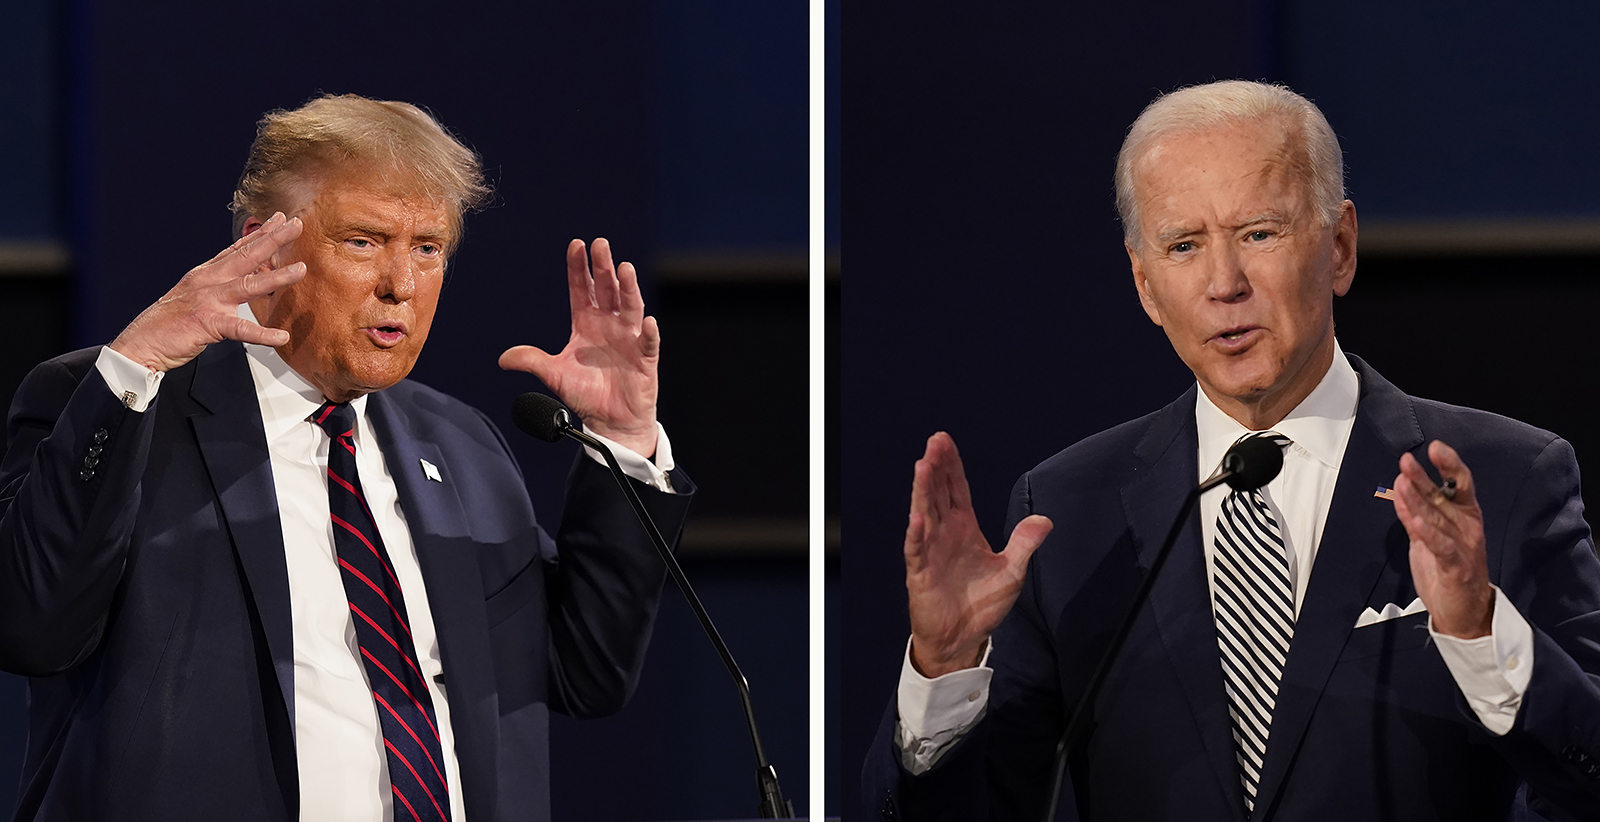 This combination image of two file photos shows then-President Donald Trump, left, and then-Democratic presidential nominee Joe Biden during a presidential debate Sept. 29, 2020, at Case Western University and Cleveland Clinic in Cleveland. (RNS/AP/Patrick Semansky)